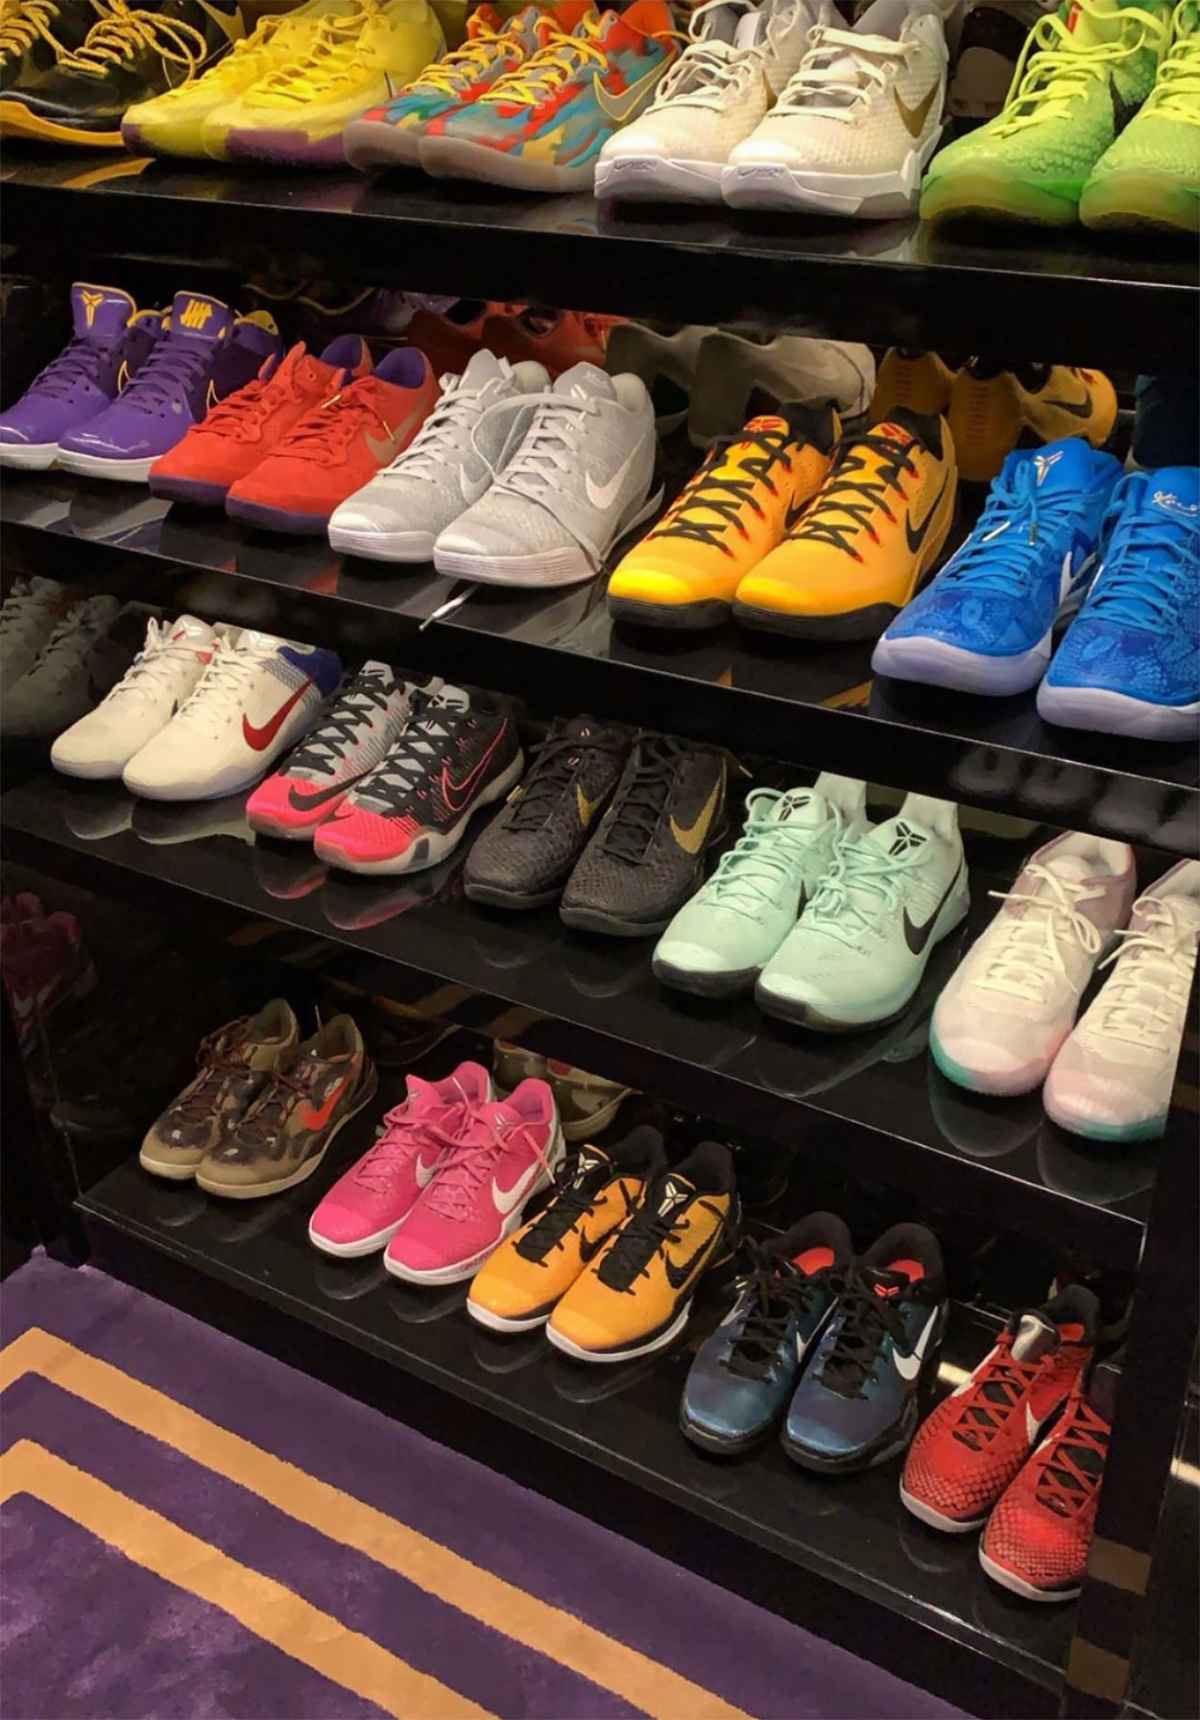 Drake Gives and Sneaker Collection Tour: Pics